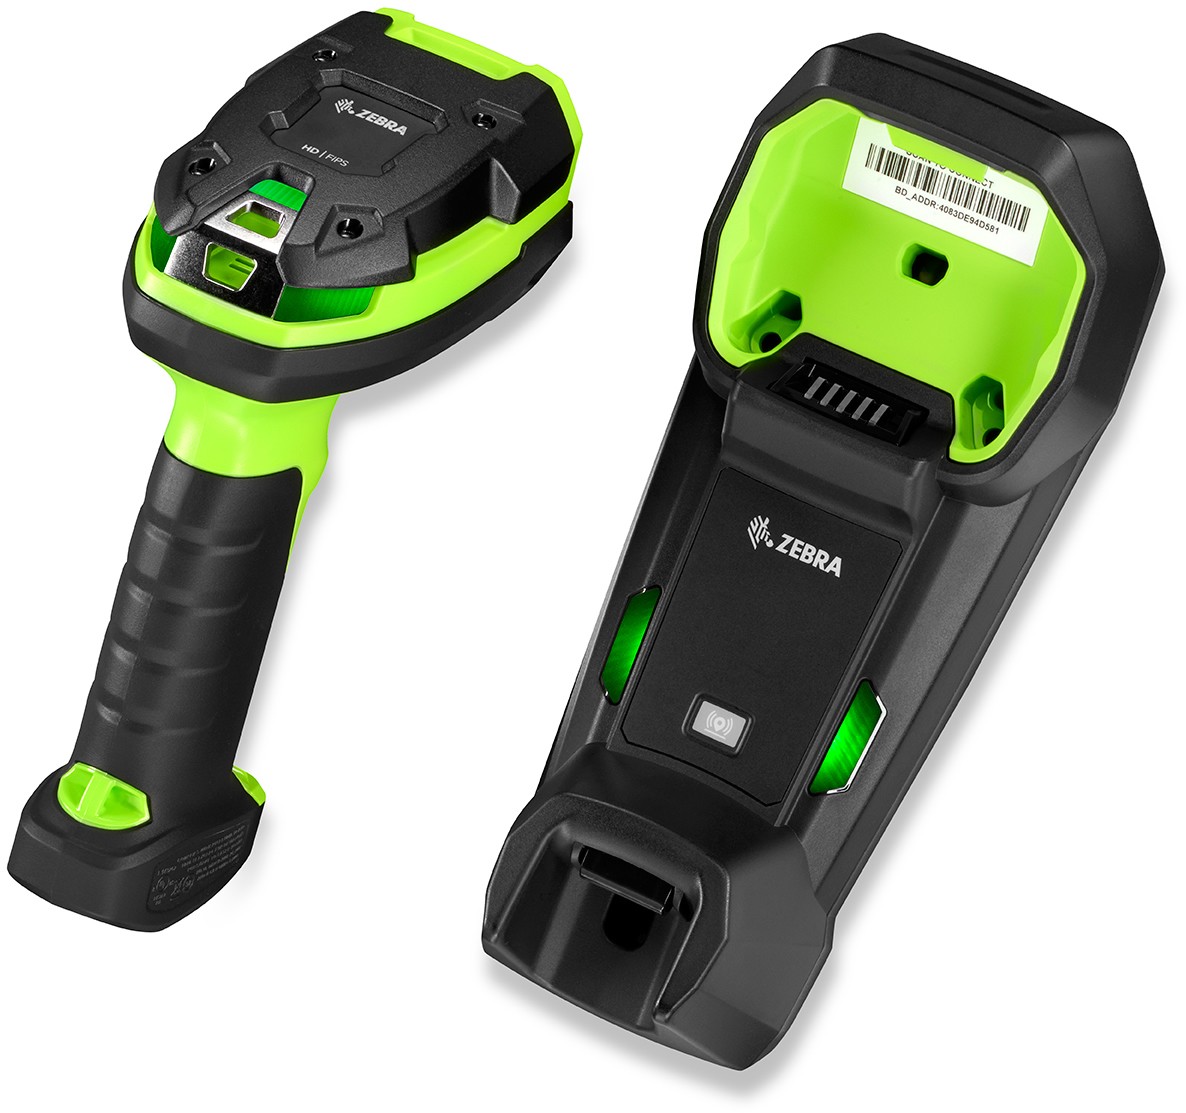 DS3678-HD Rugged Green Standard Cradle USB Kit: DS3678-HD2F003VZWW Scanner, CBA-U42-S07PAR Shielded USB Cable Supports 12V P/S, STB3678-C100F3WW Cradle, PWR-BGA12V50W0WW Power Supply, CBL-DC-451A1-01 and 23844-00-00R Line Cord